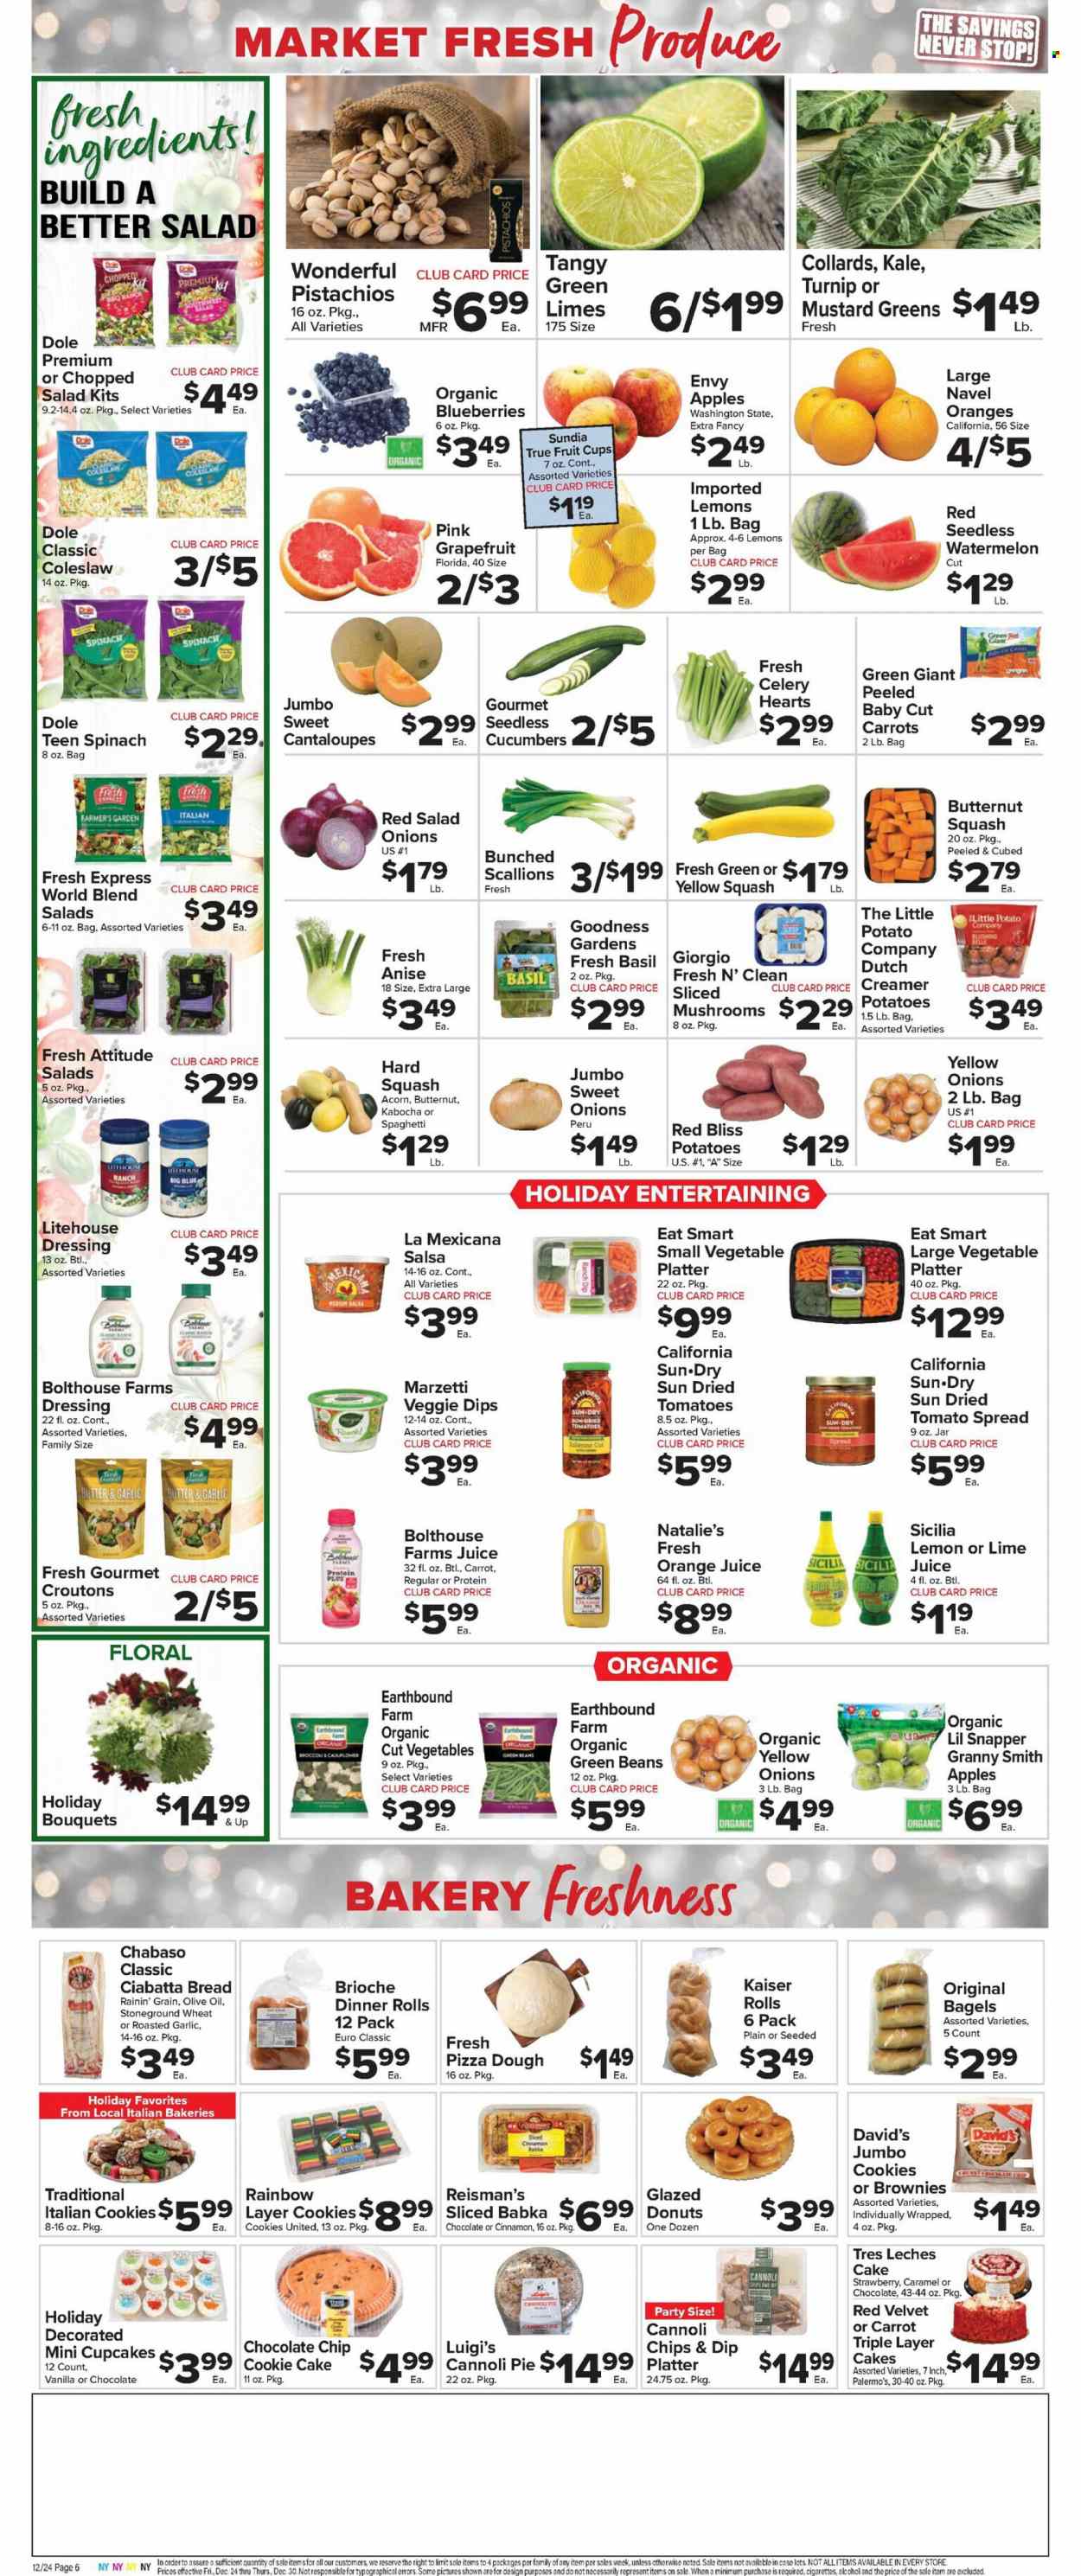 thumbnail - Foodtown Flyer - 12/24/2021 - 12/30/2021 - Sales products - fruit cup, bagels, ciabatta, dinner rolls, brioche, cupcake, brownies, donut, cantaloupe, green beans, kale, potatoes, Dole, chopped salad, sleeved celery, yellow squash, apples, grapefruits, limes, watermelon, Granny Smith, coleslaw, spaghetti, butter, pizza dough, cookies, chips, croutons, esponja, cinnamon, mustard, dressing, salsa, olive oil, pistachios, orange juice, juice, bouquet, butternut squash, mustard greens, lemons. Page 8.